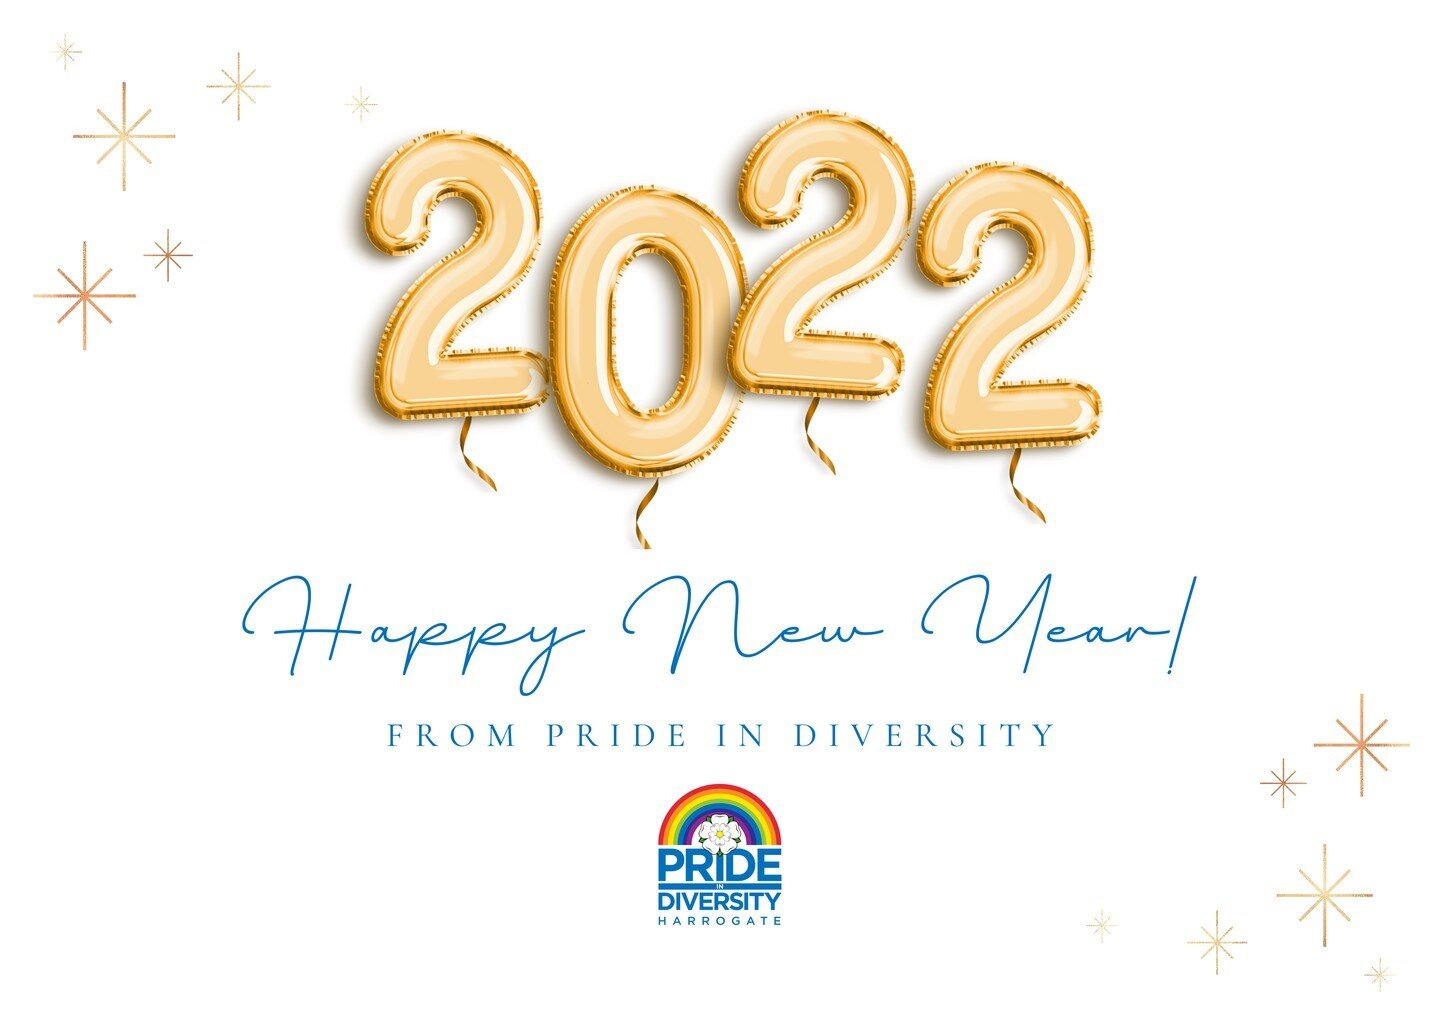 Happy New Year from all of us at Pride in Diversity!⠀
⠀
We can&rsquo;t wait to see you all again soon, especially in June 2022!⠀
⠀
#HappyNewYear